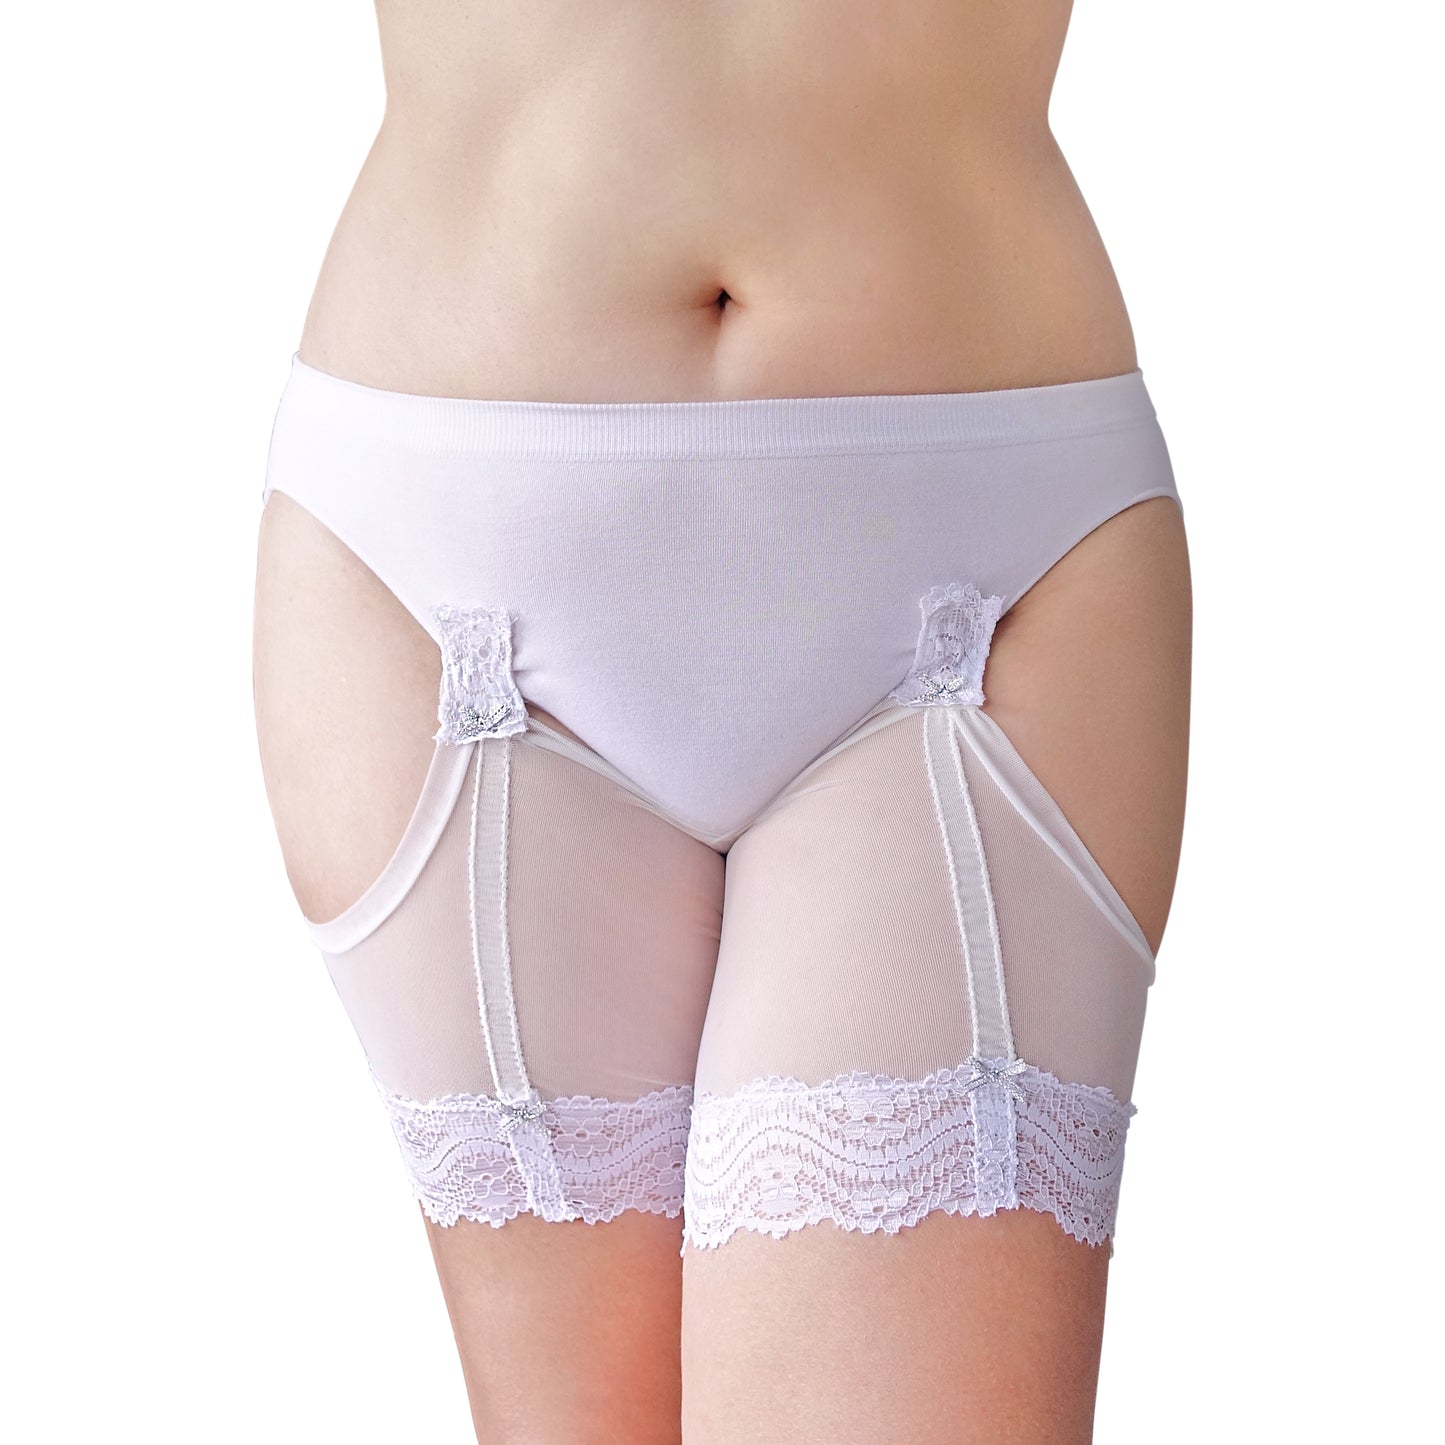 ANTI CHAFE Clip-On Thigh Bands - WHITE & IVORY